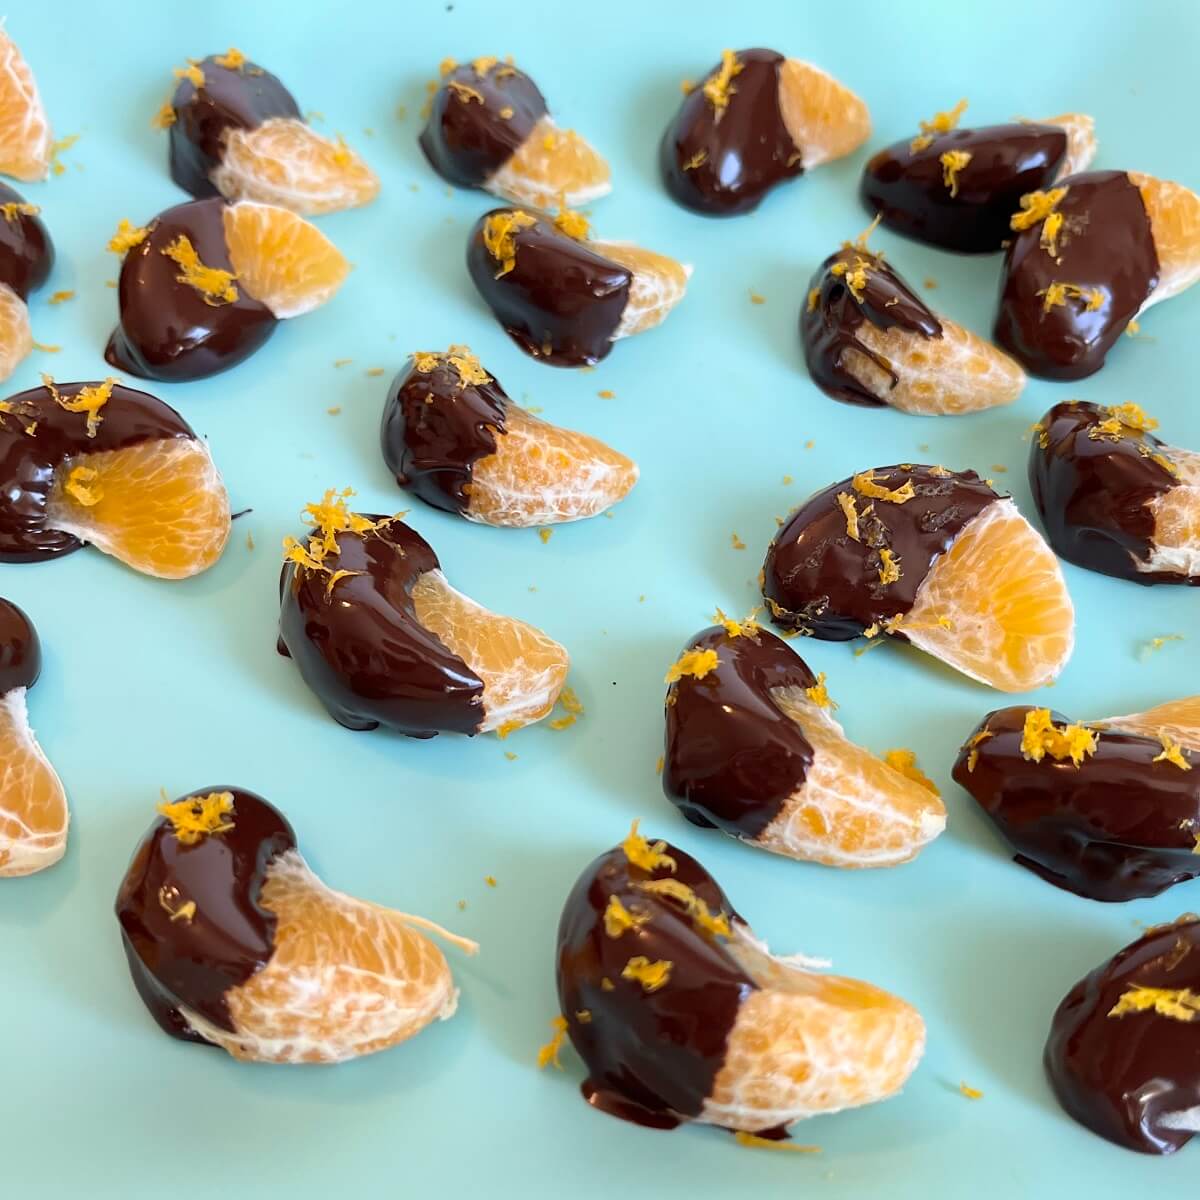 Clementine segments dipped in melted chocolate on a silicone baking mat.